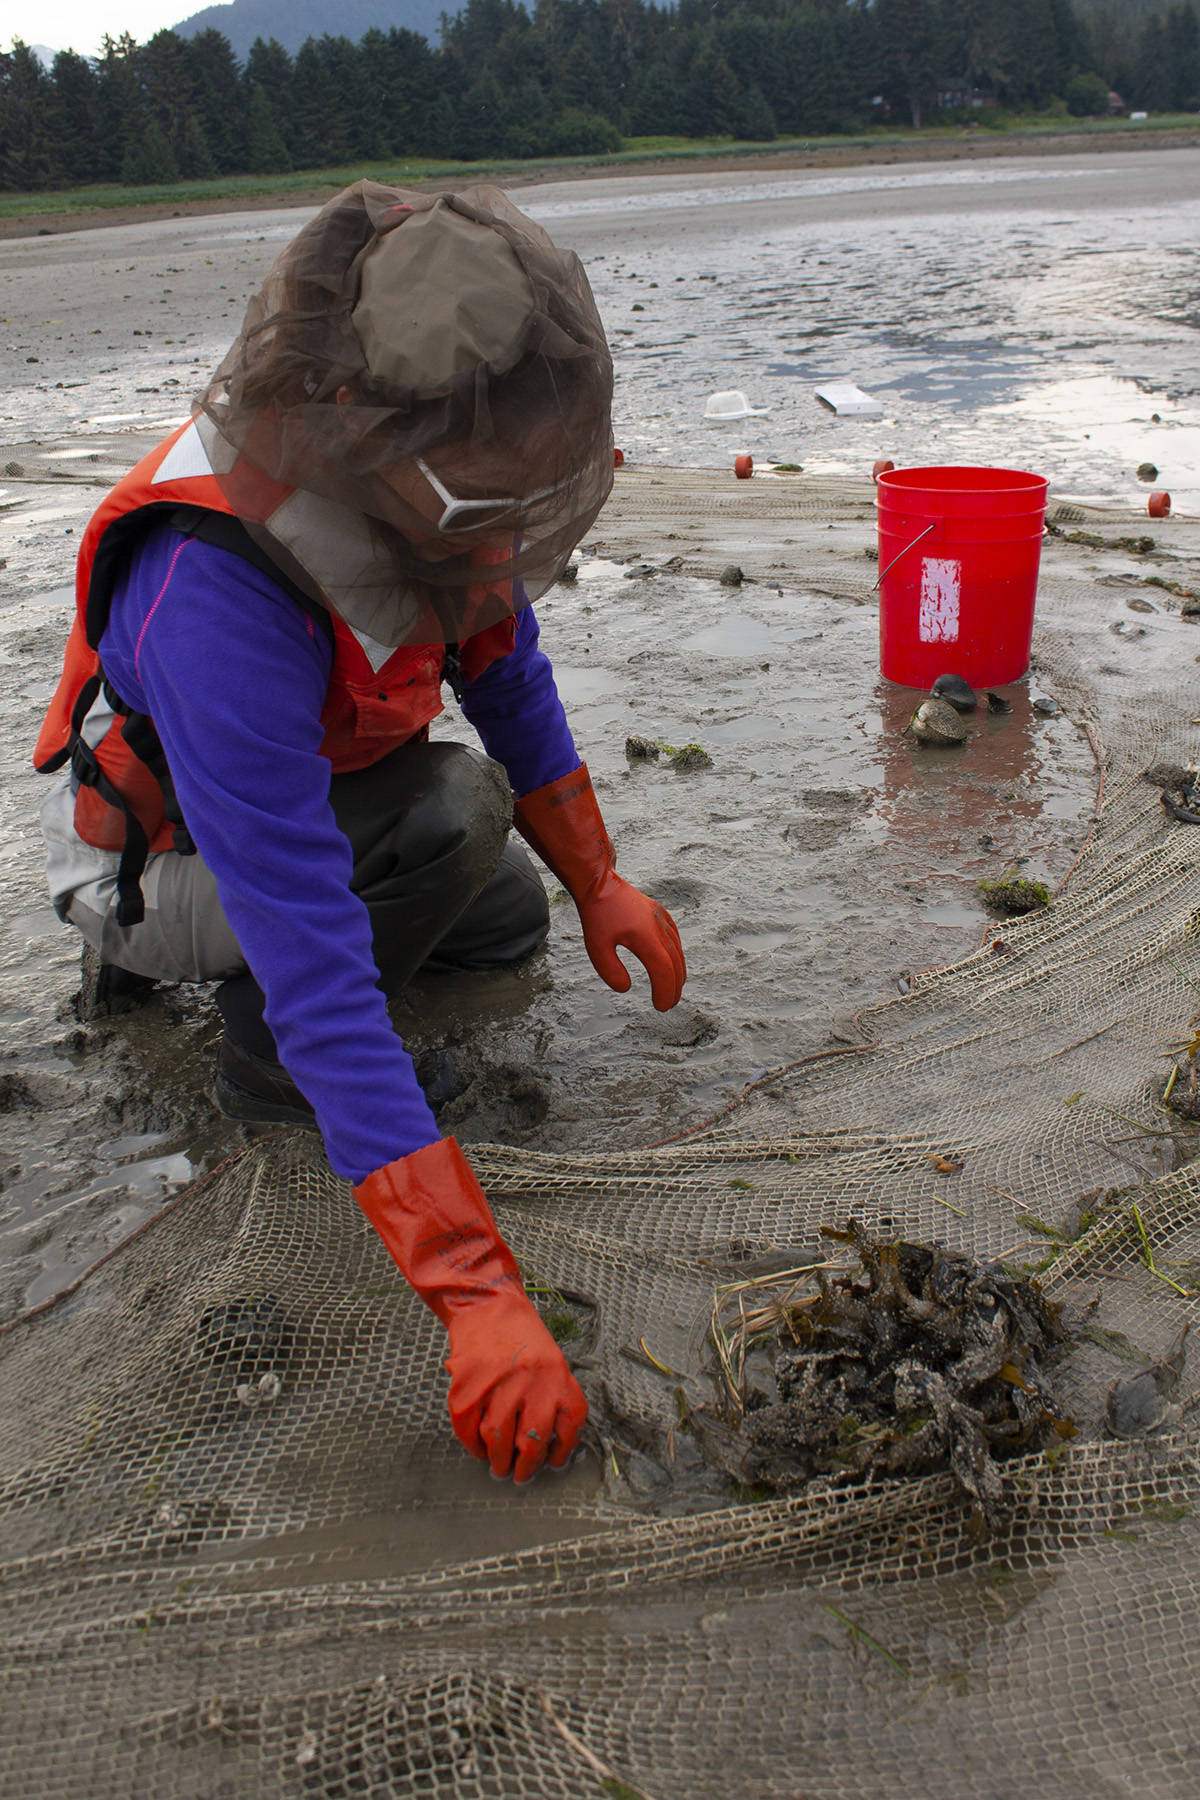 Postdoctoral student Krista OKE sorts through a seine for fish in the Mendenhall River estuary as part of the Alaska NSF EPSCoR Fire and Ice project on July 3, 2019. (Courtesy Photo | Tom Moran)